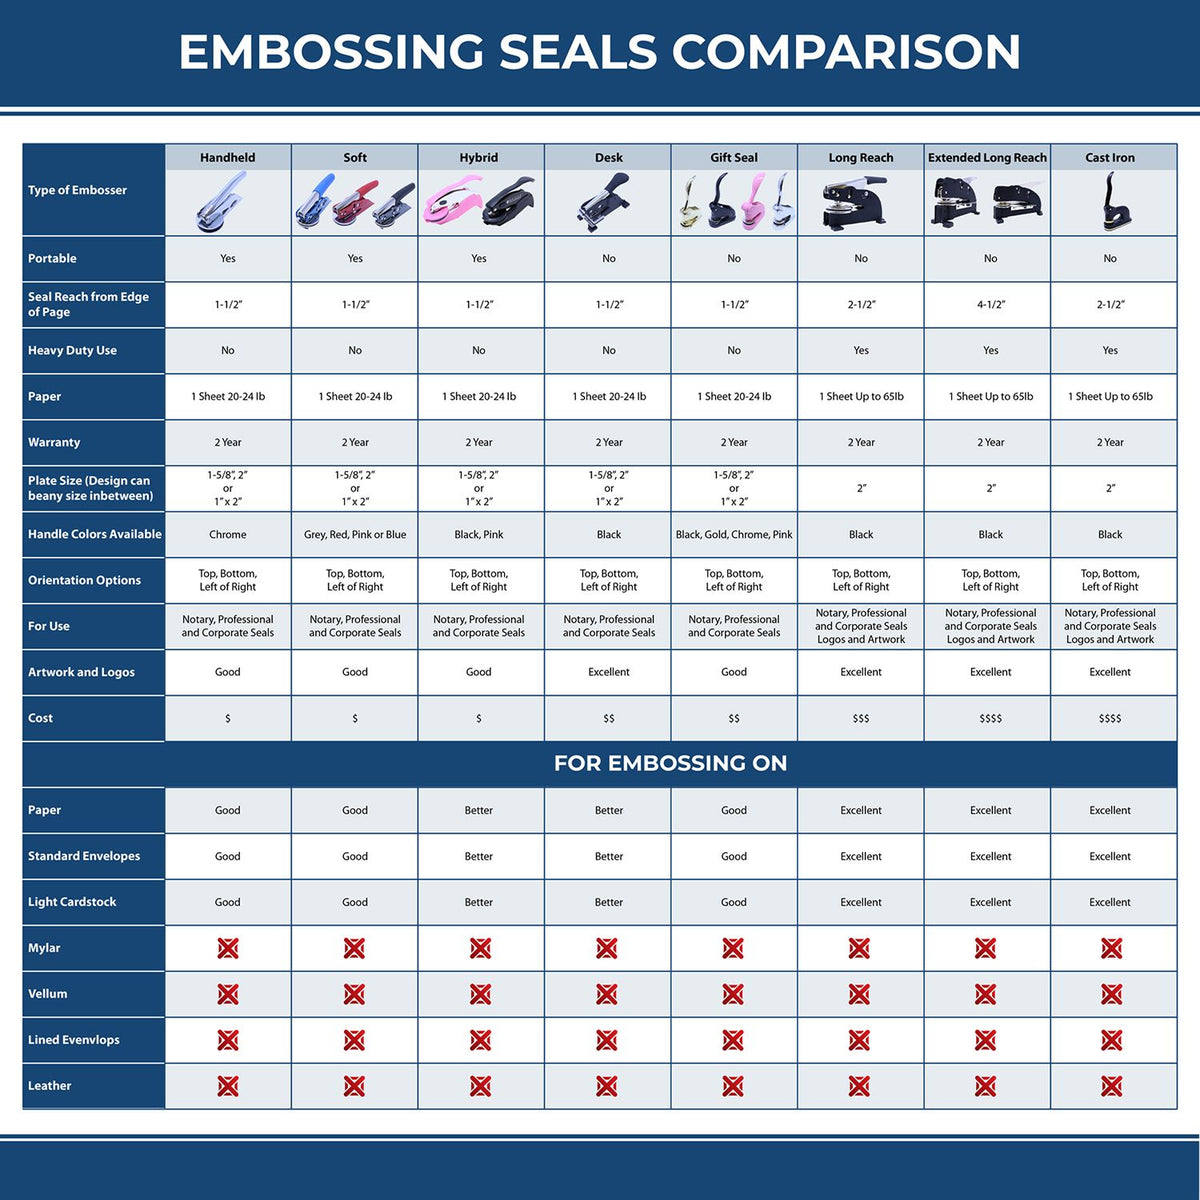 A comparison chart for the different types of mount models available for the Arkansas Desk Surveyor Seal Embosser.